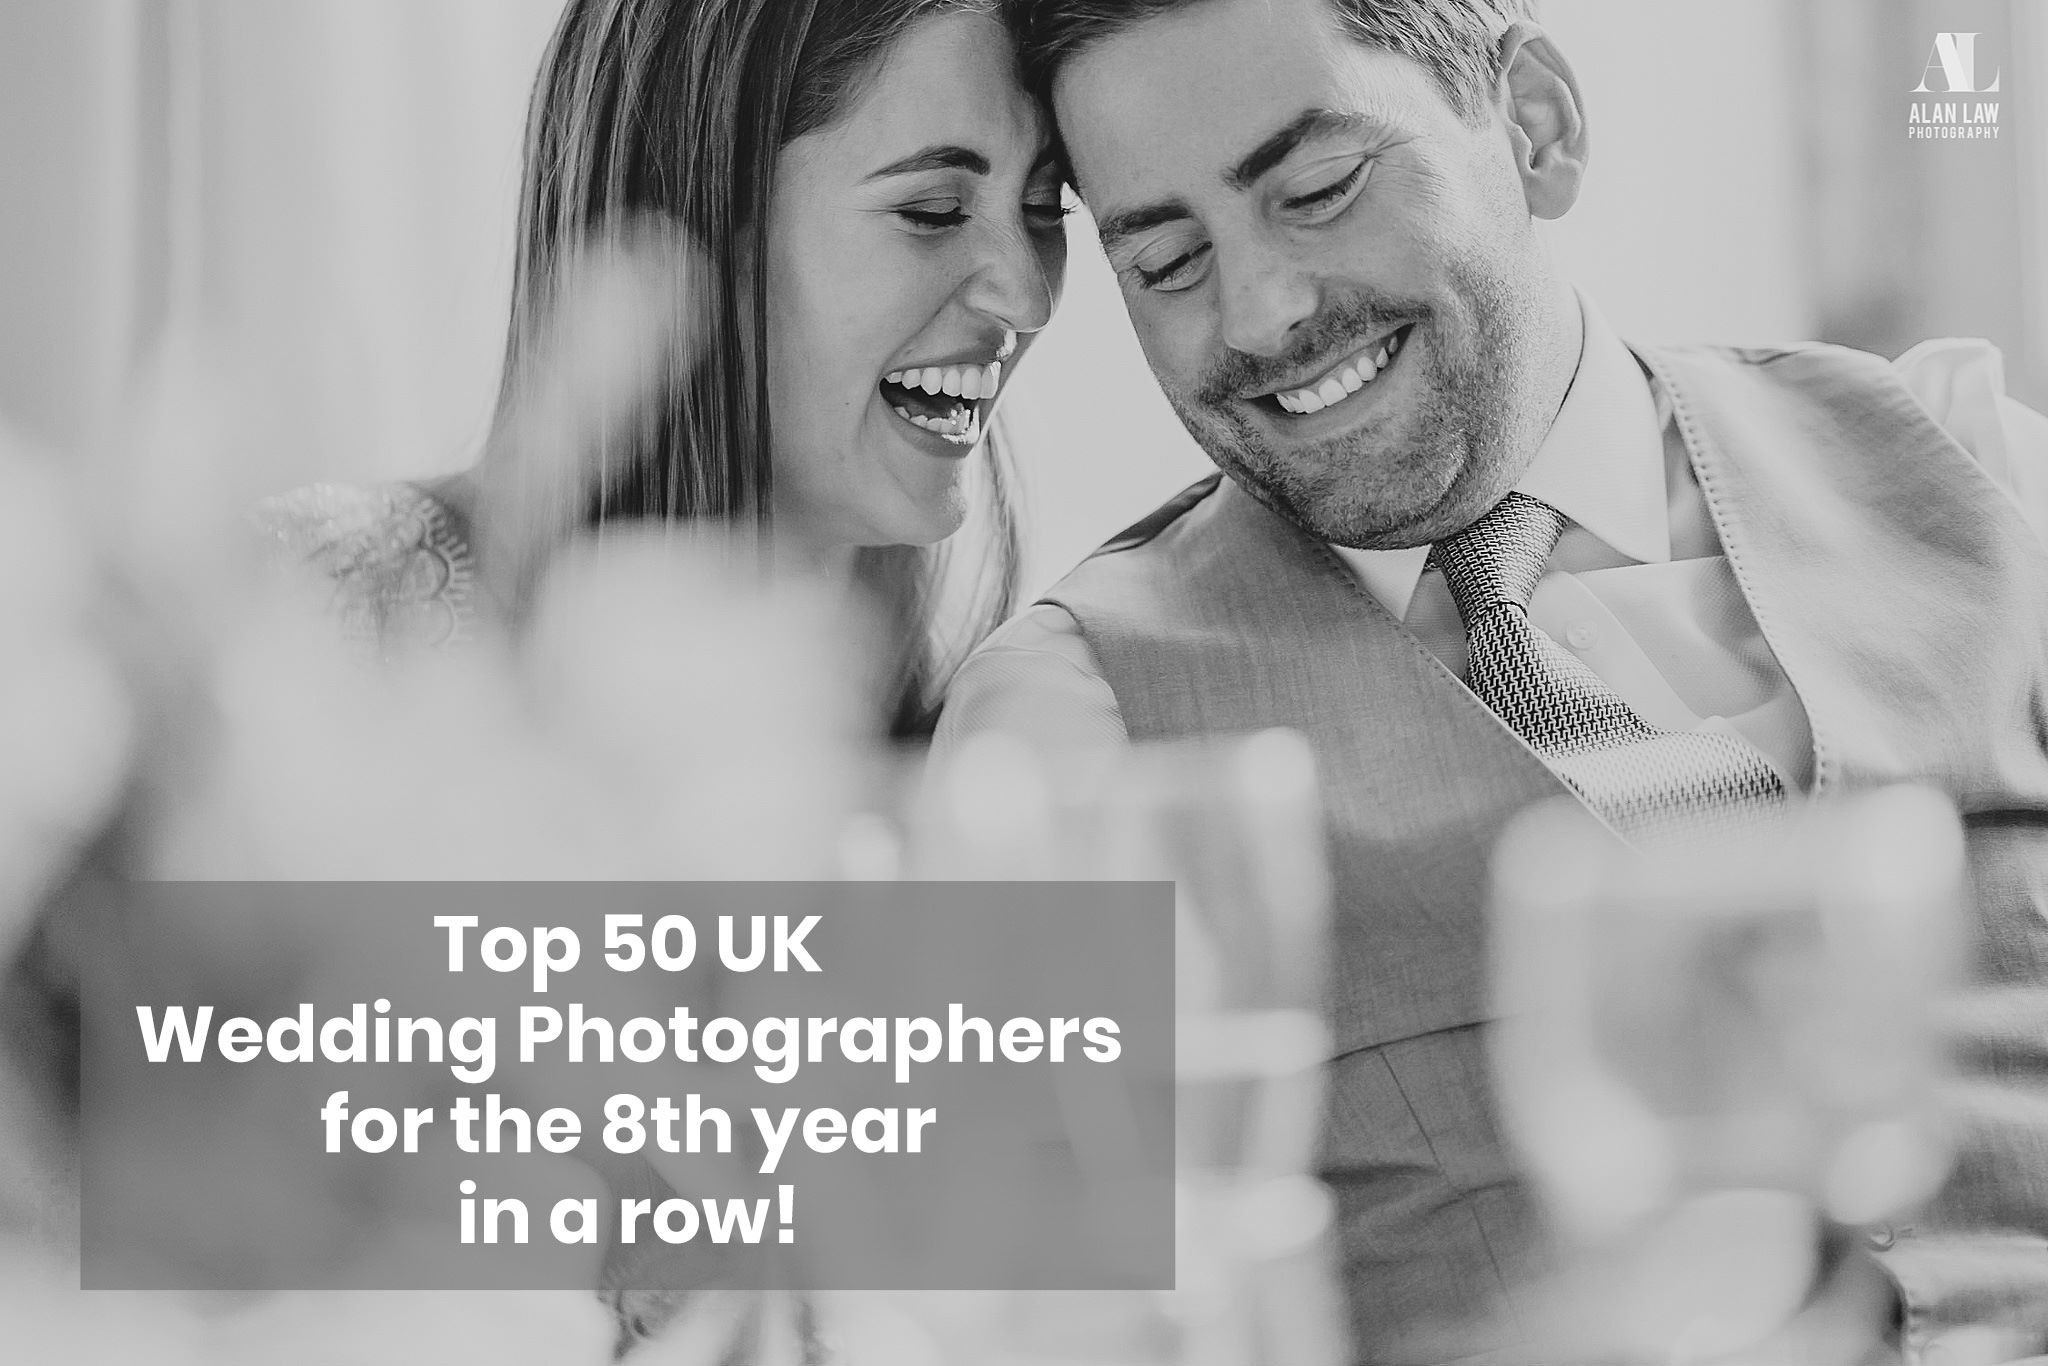 Top 50 UK Wedding Photographers 8th year in a row